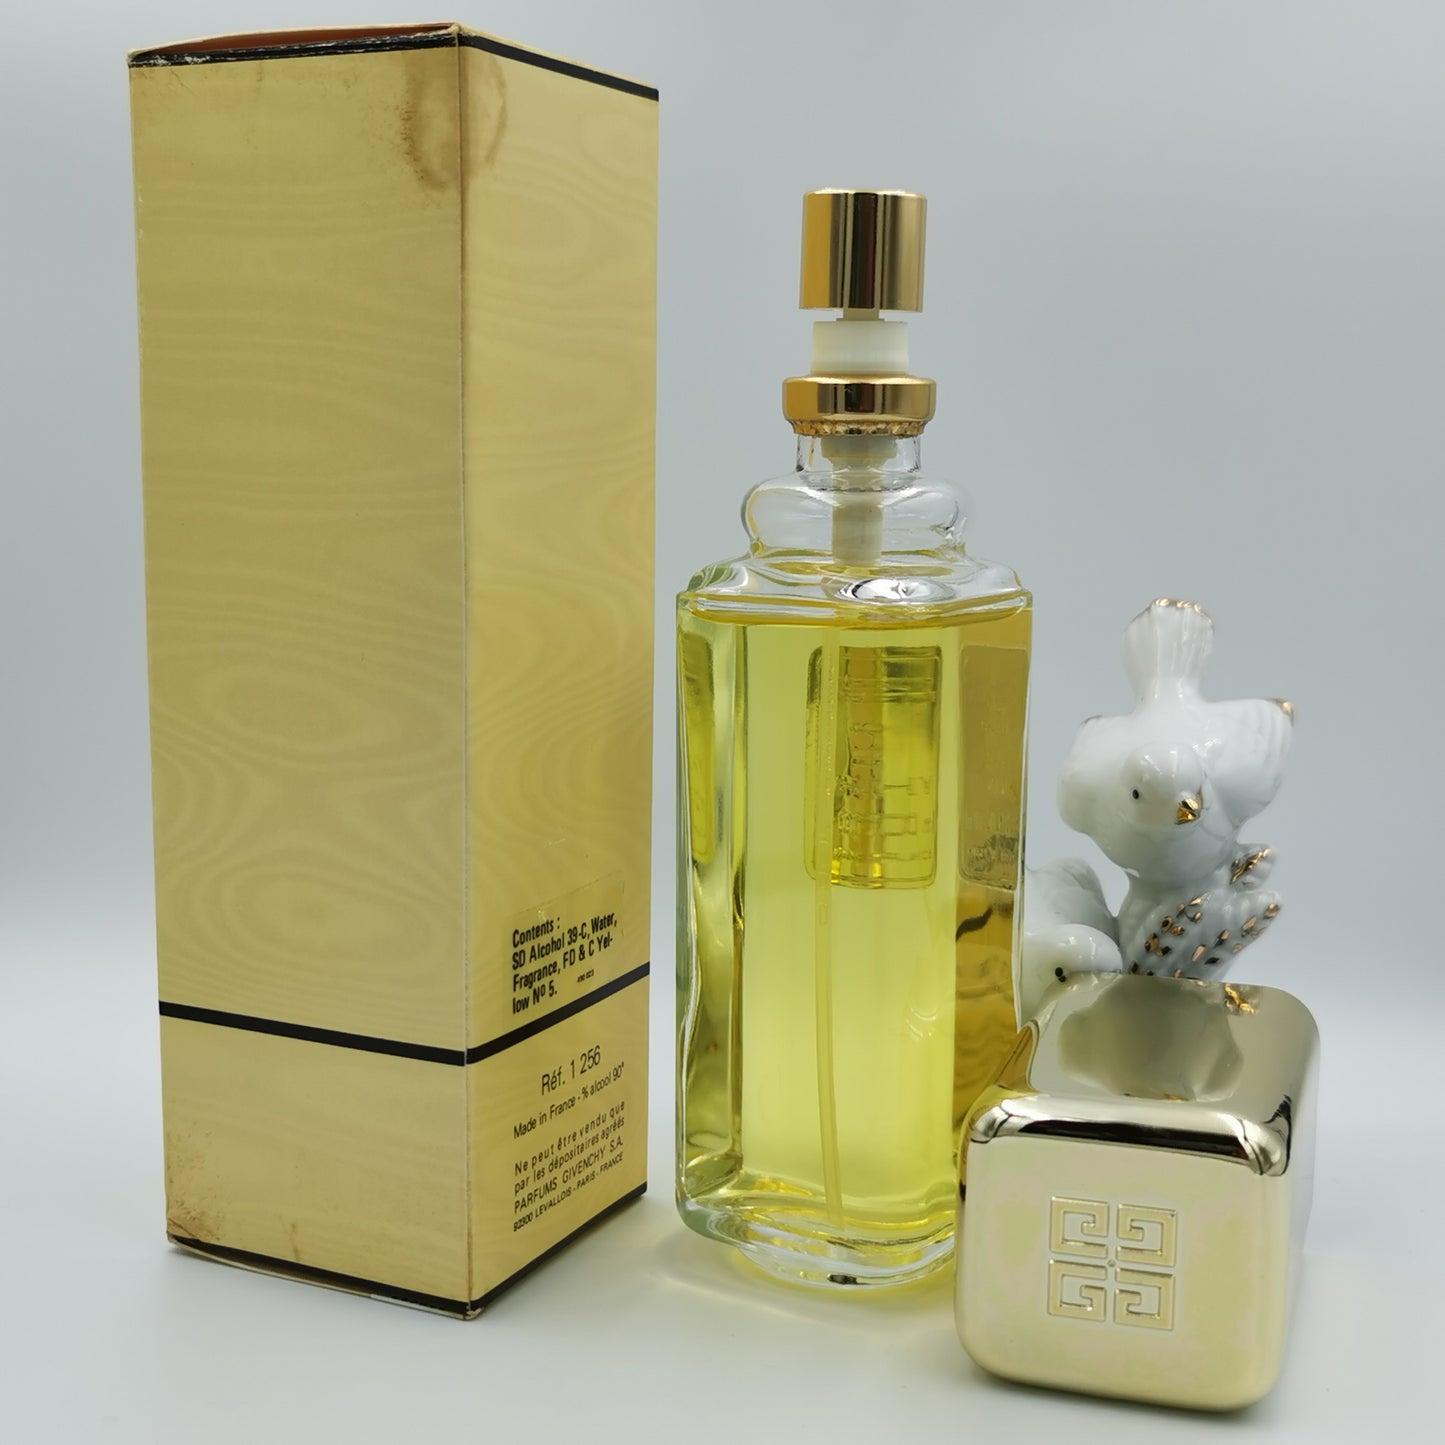 Le de Givenchy by Givenchy 100ml EDT Spray VINTAGE